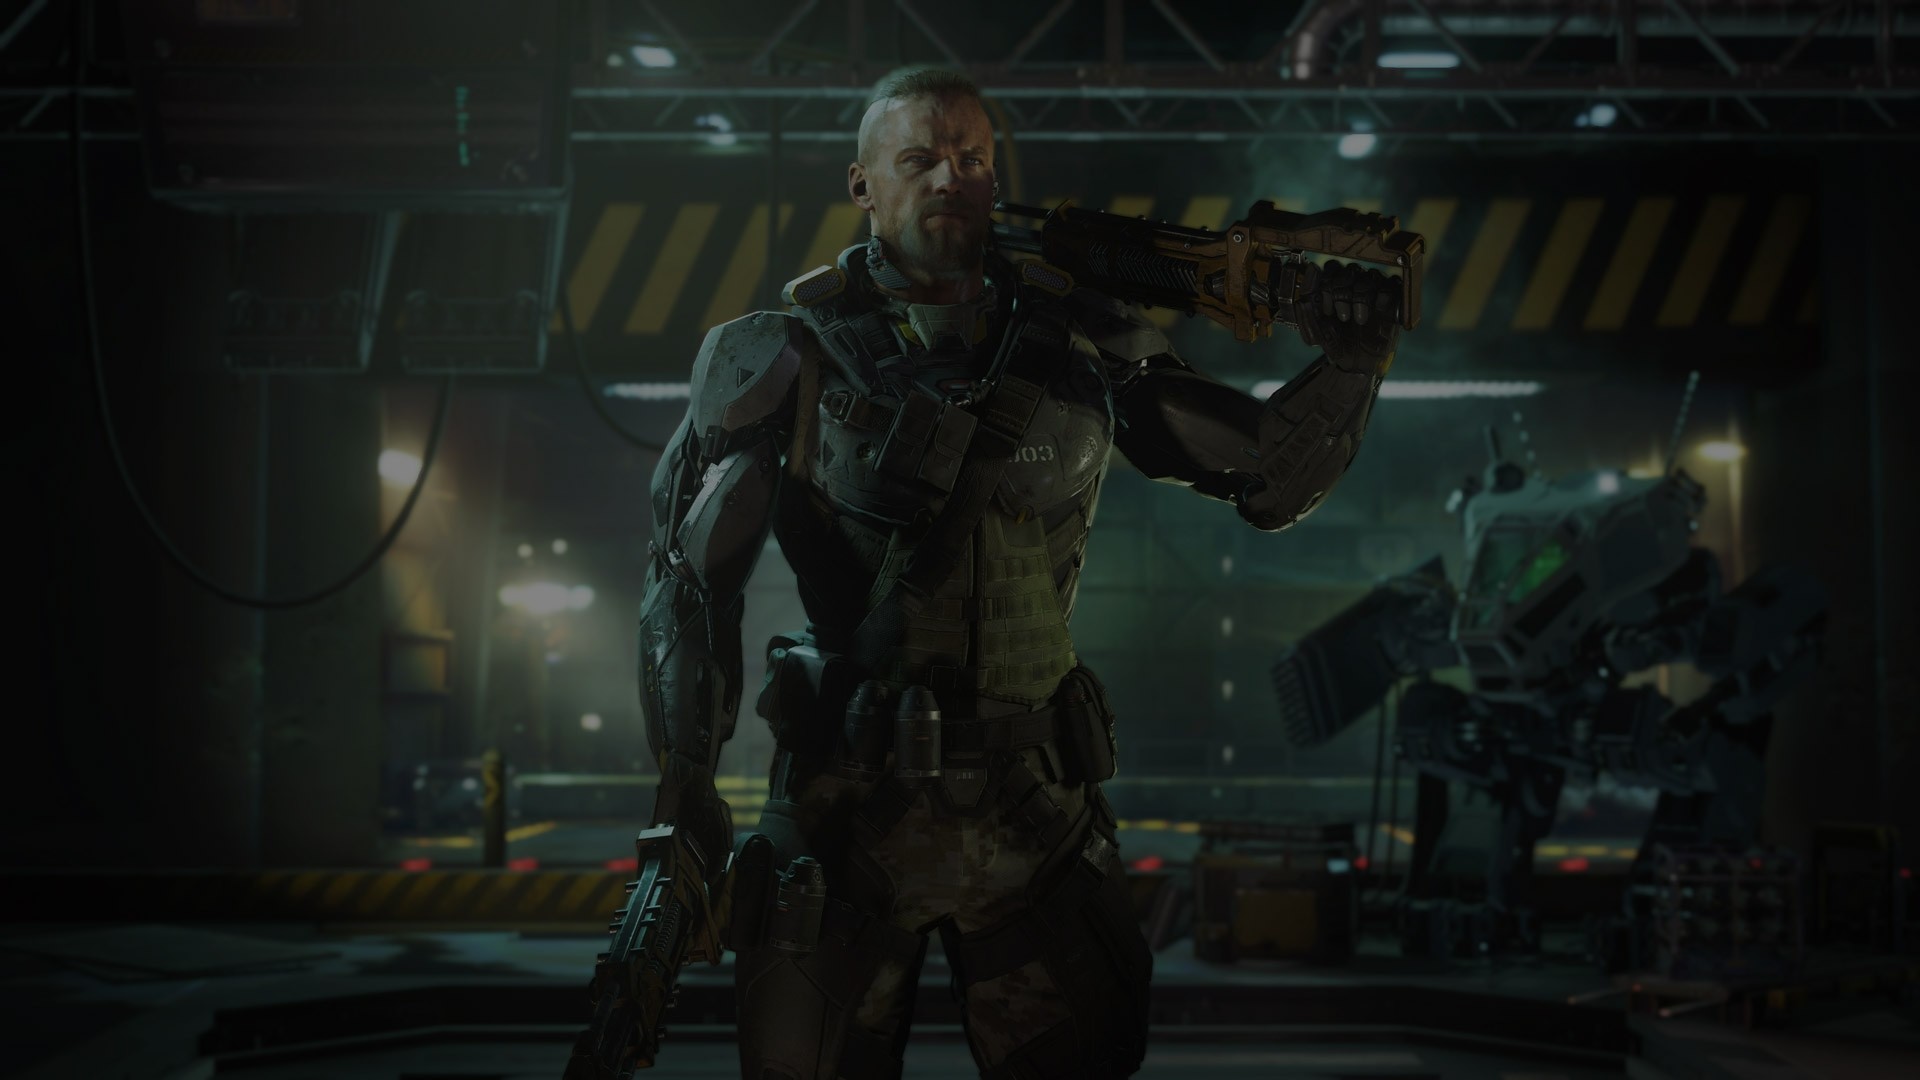 New hi res images for the 8 known Black Ops 3 Specialist found Charlie INTEL